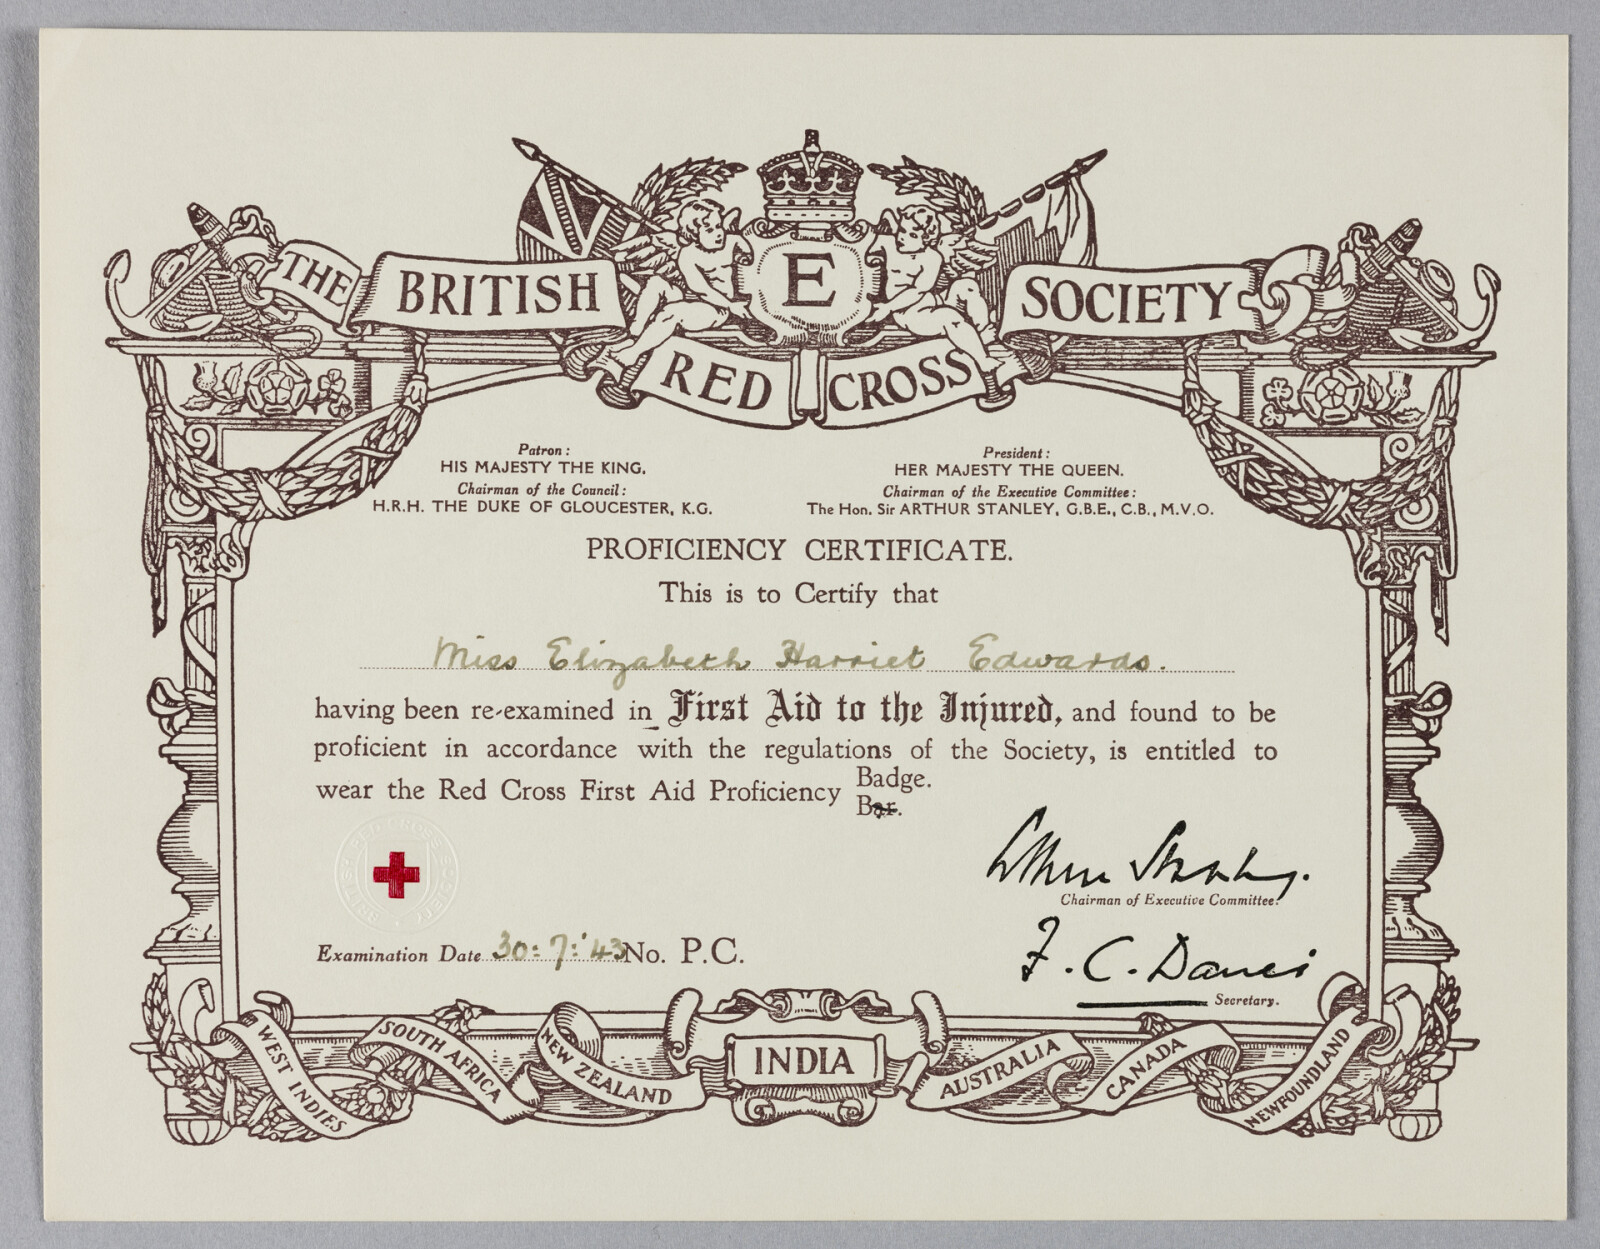 Hetty Edward's Red Cross Society certificate for 'First Aid to the Injured' [1943]